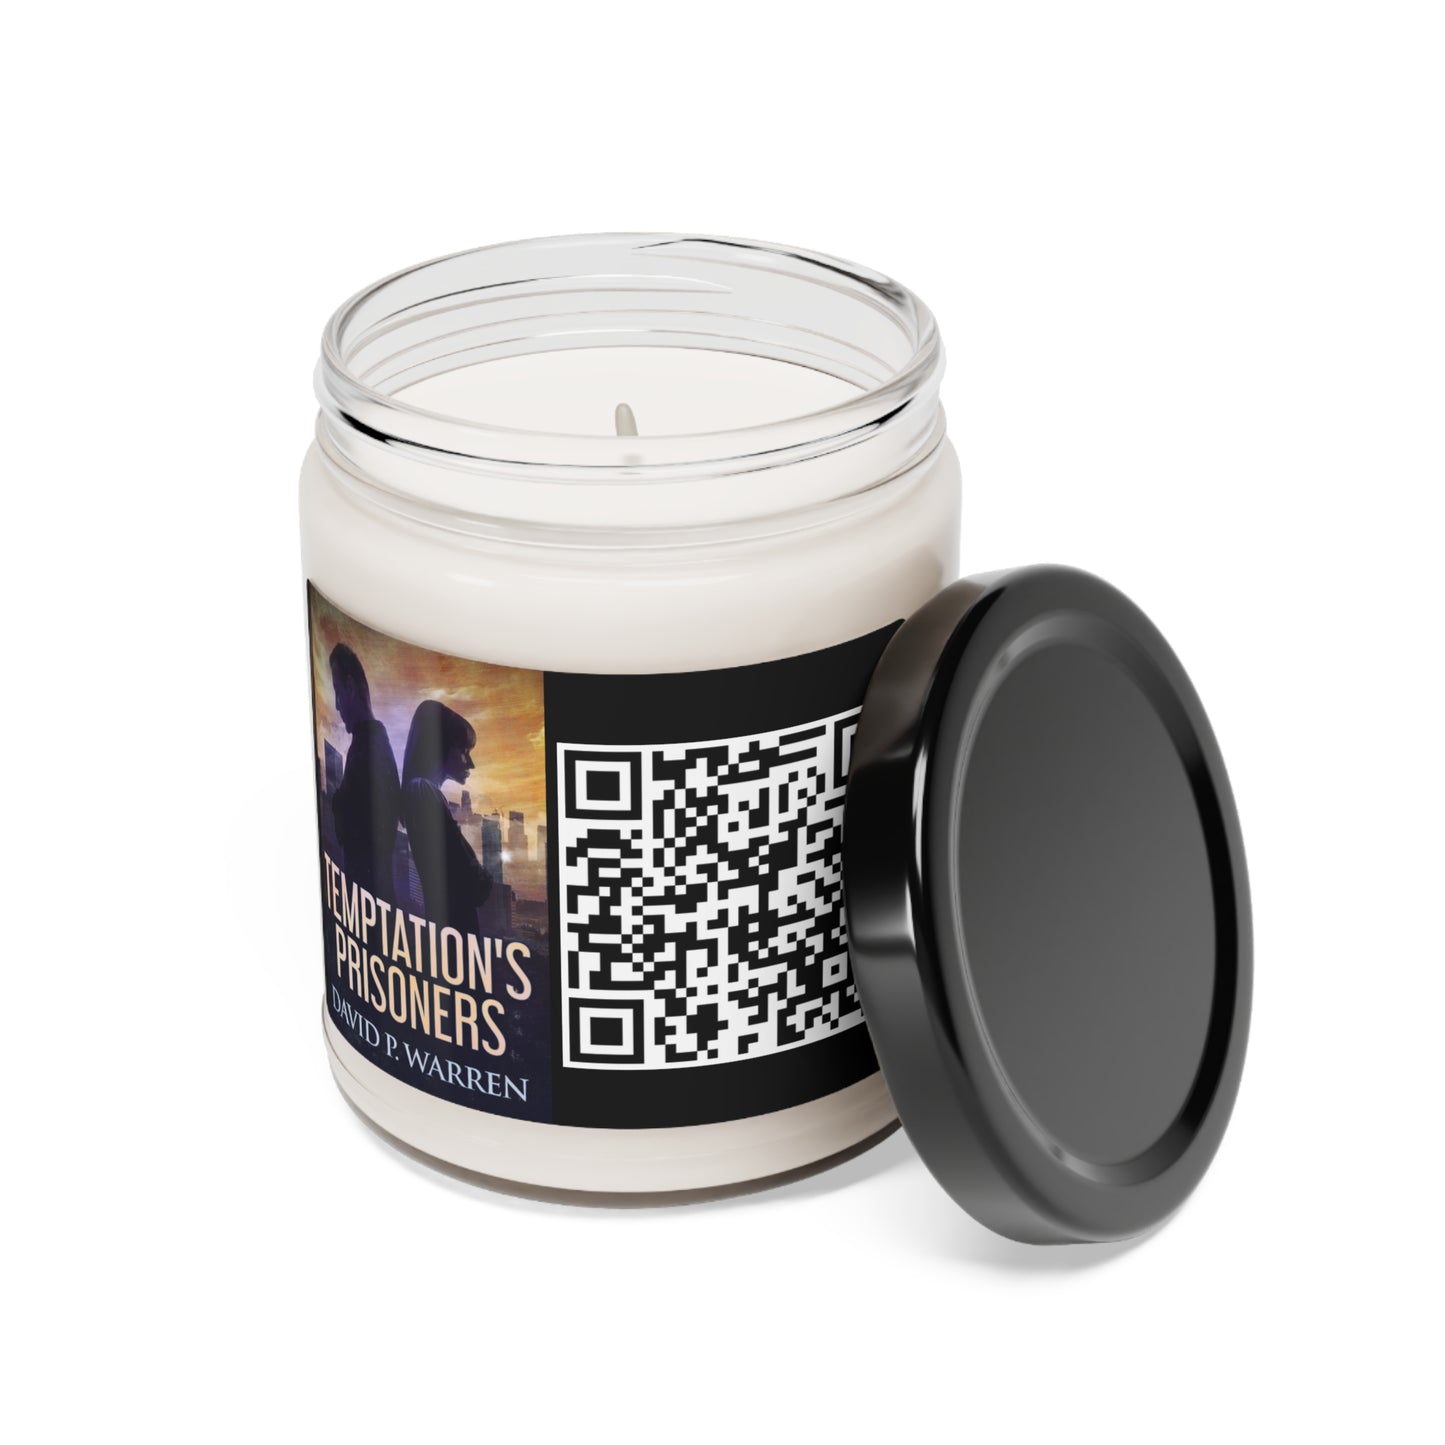 Temptation's Prisoners - Scented Soy Candle